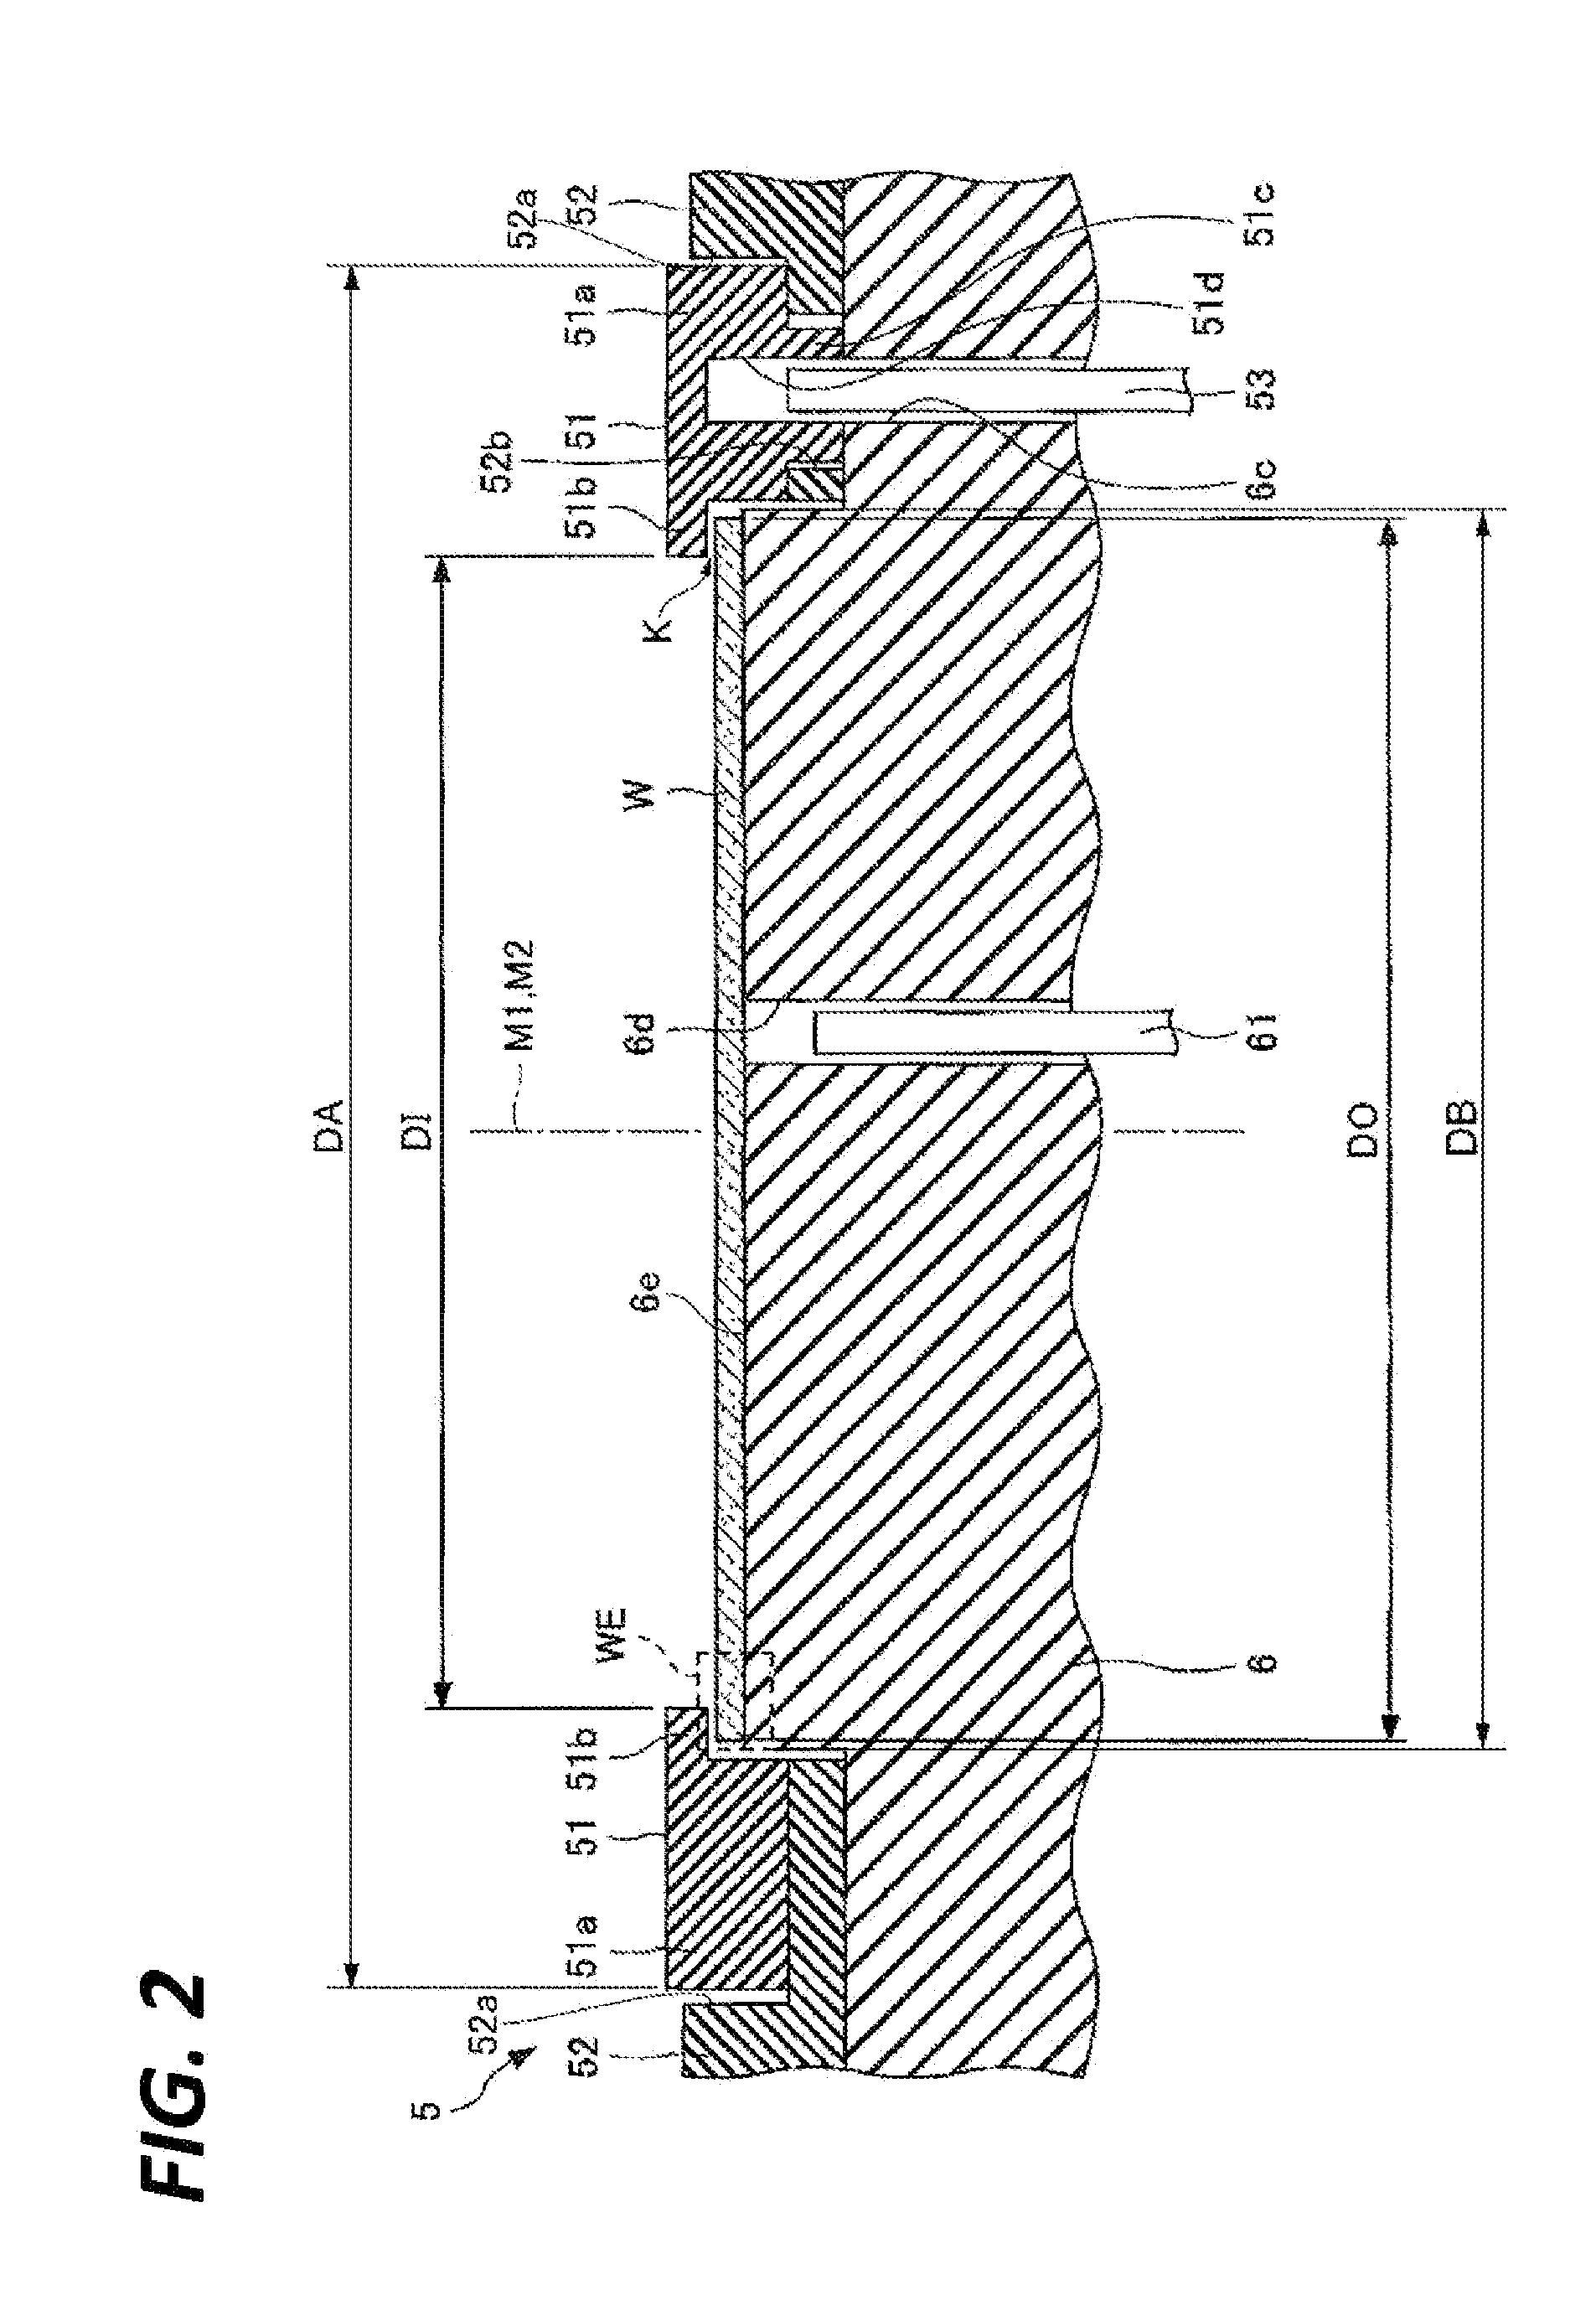 Substrate mounting table and plasma treatment device